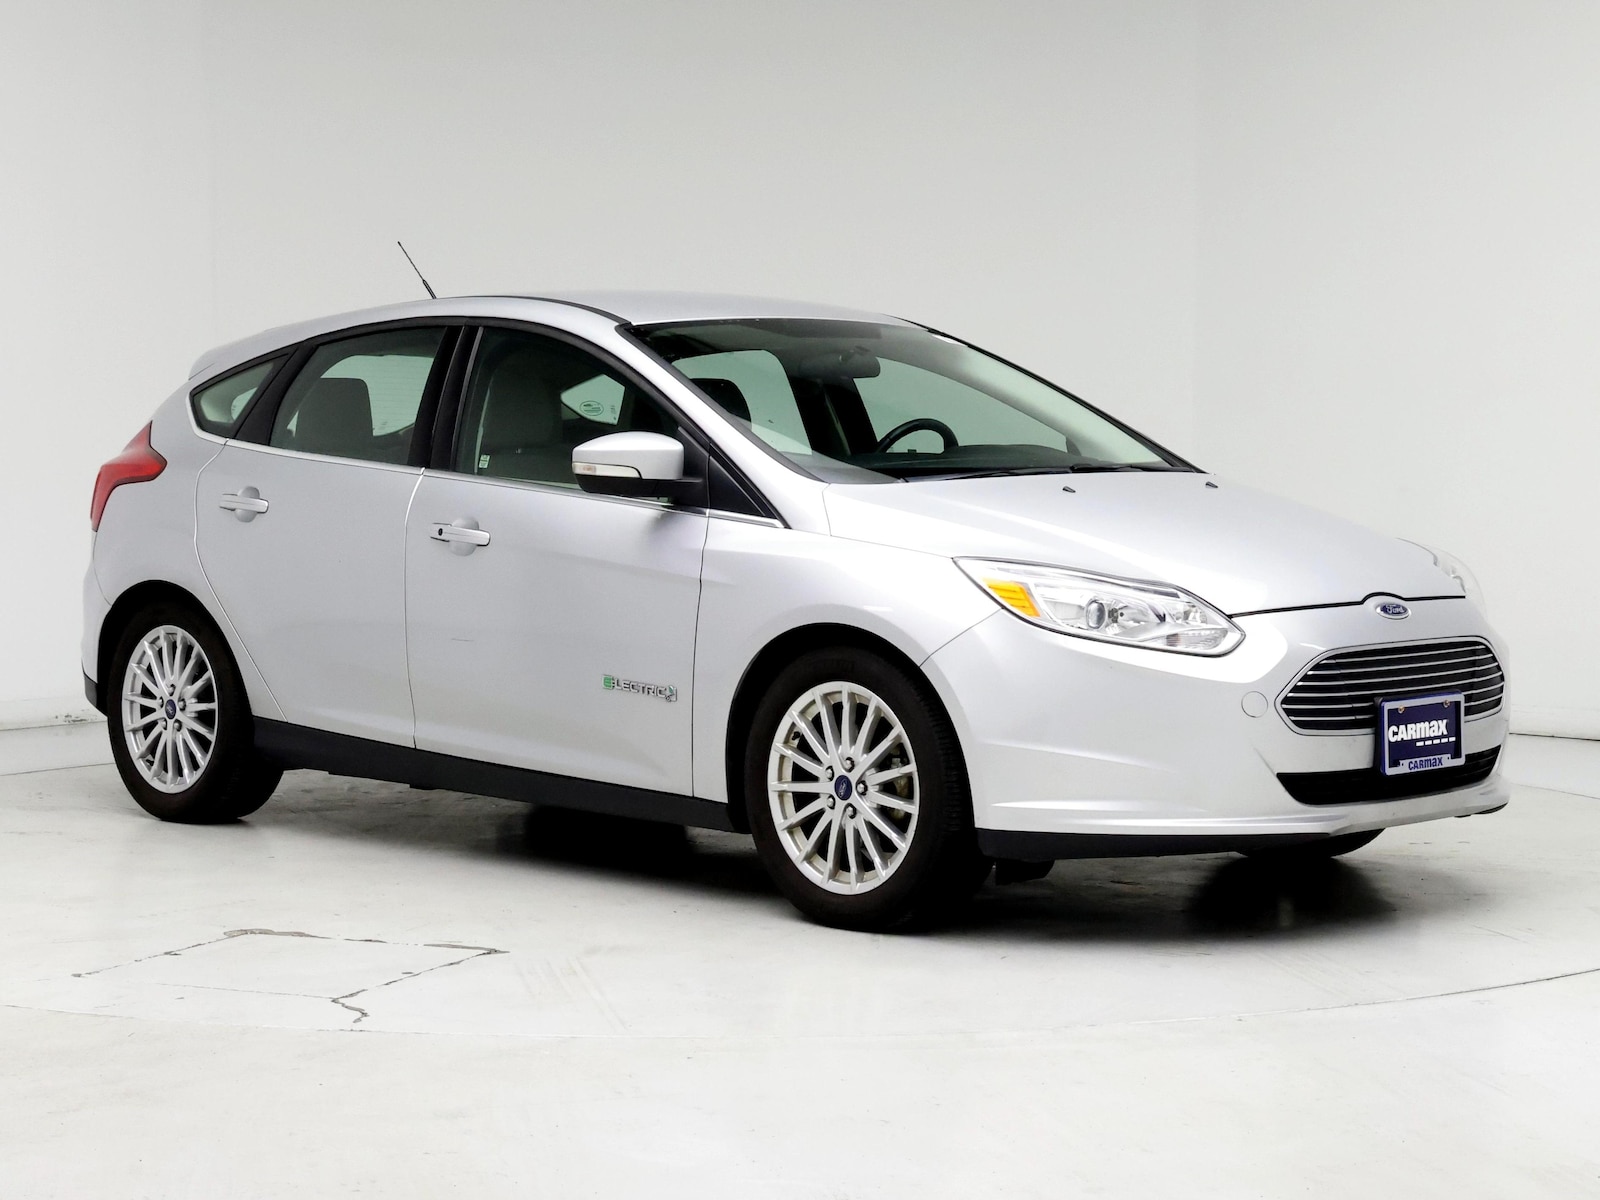 Used 2013 Ford Focus Electric with VIN 1FADP3R4XDL153905 for sale in Kenosha, WI